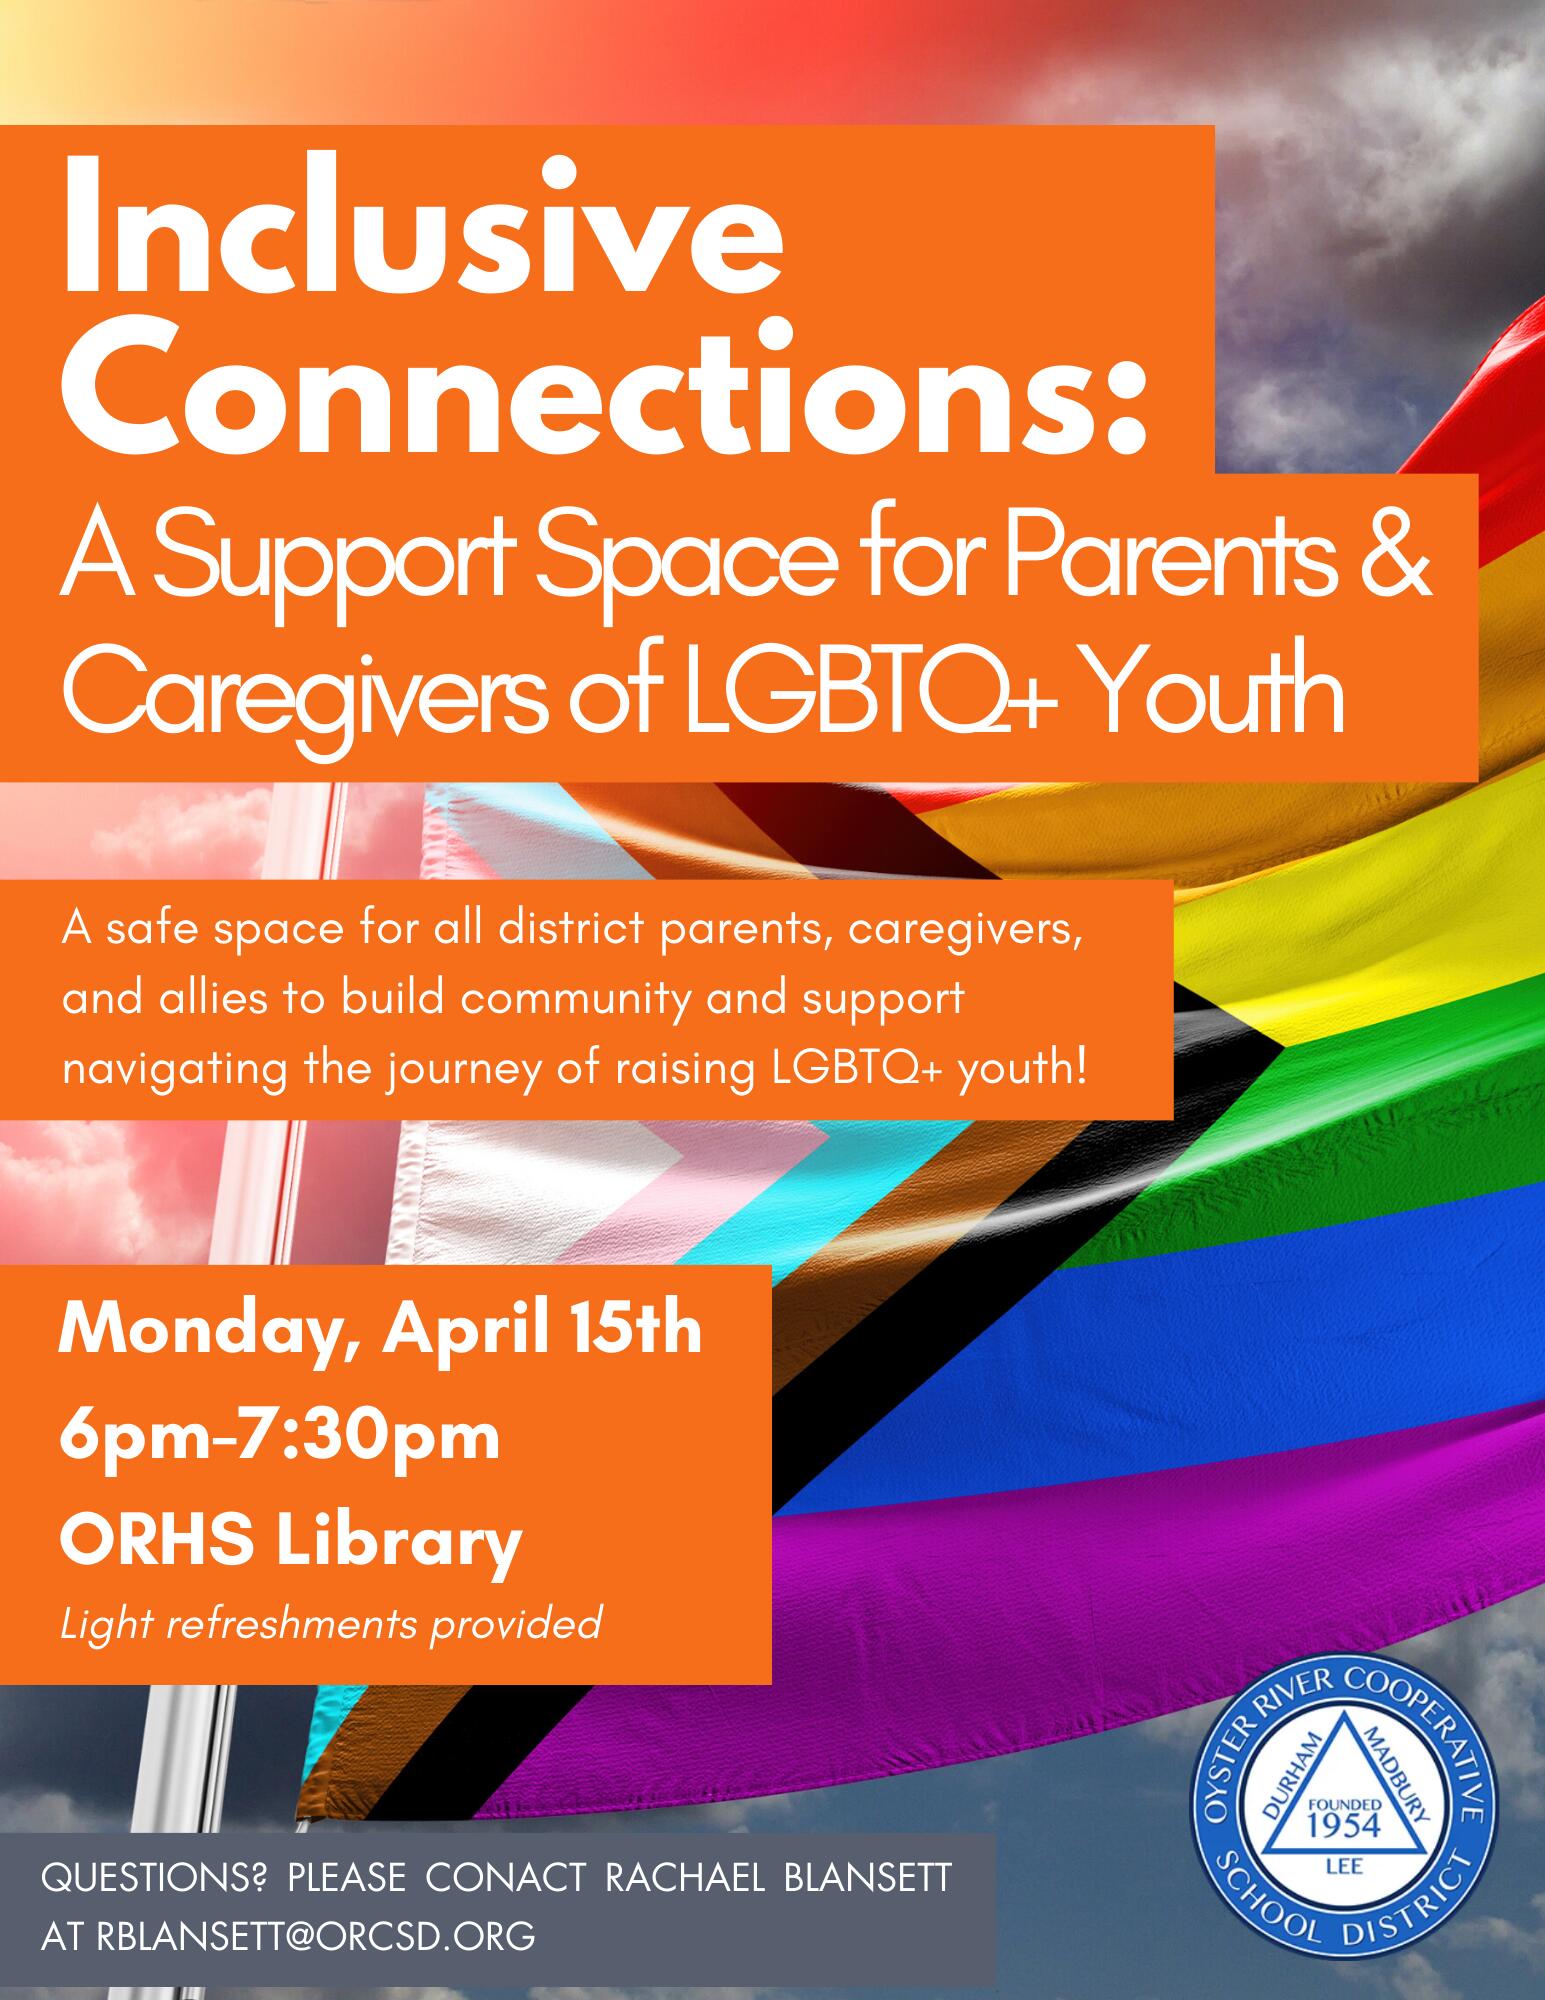 A flyer for an event that reads "Inclusive Connections: A Support Space for Parents & Caregivers of LGBTQ+ Youth" happening on Monday, April 15th from 6pm-7:30pm in the ORHS Library